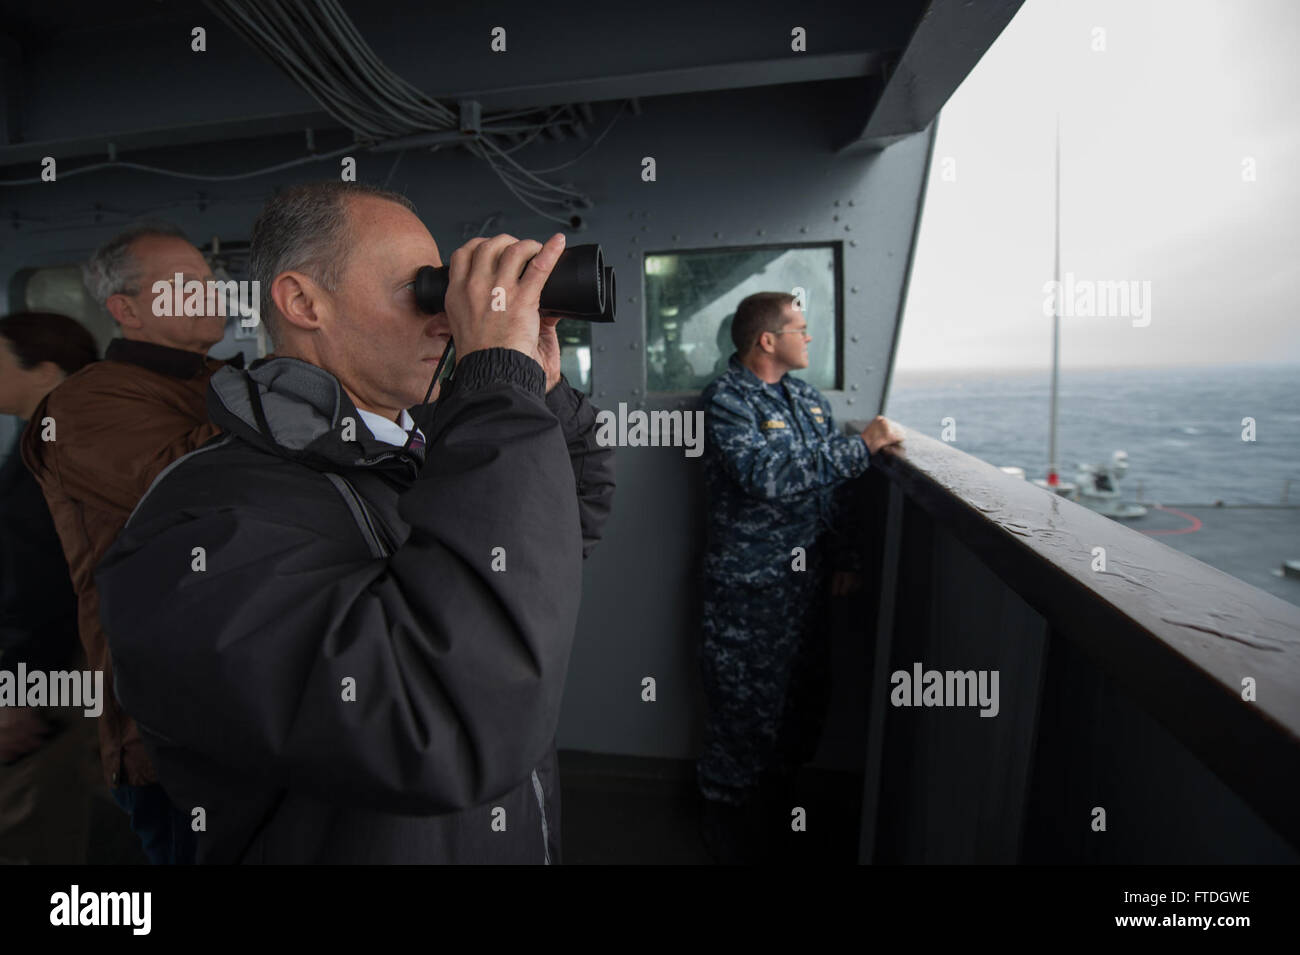 151020-N-ZE250-120 NORTH ATLANTIC OCEAN (Oct. 20, 2015) Robert G. Bell, senior civilian representative of the Secretary of Defense in Europe, observes a missile launch while aboard U.S. 6th Fleet command and control ship USS Mount Whitney (LCC 20) October 20, 2015. Mount Whitney hosted distinguished visitors for the Maritime Theater Missile Defense forum's At Sea Demonstration 2015. (U.S. Navy photo by Mass Communication Specialist 3rd Class Weston Jones/Released) Stock Photo